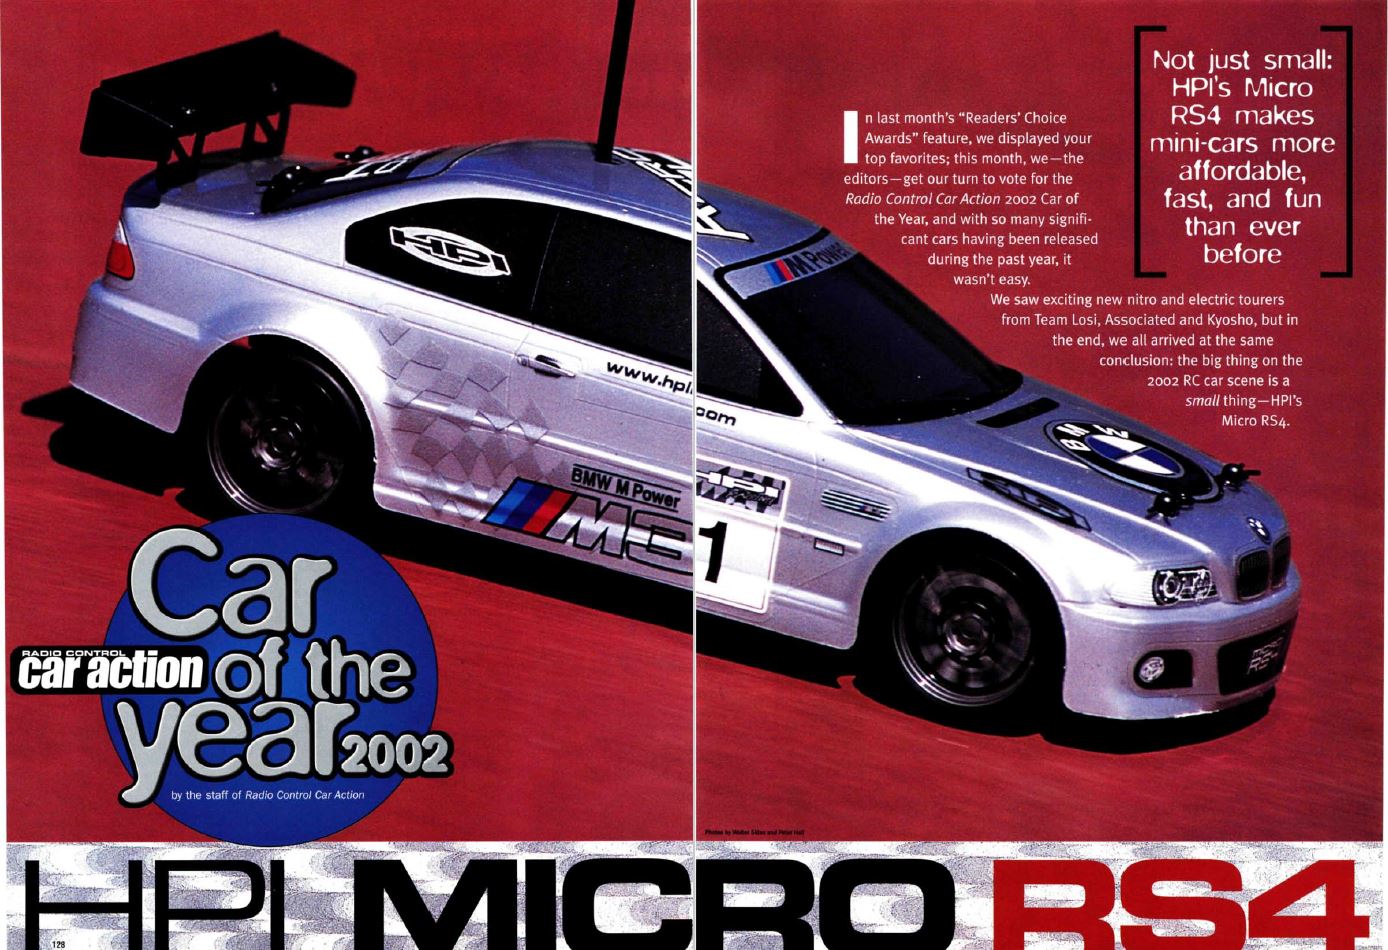 #TBT The HPI Racing Micro RS4 is named "Car Of The Year" In August 2002 Issue